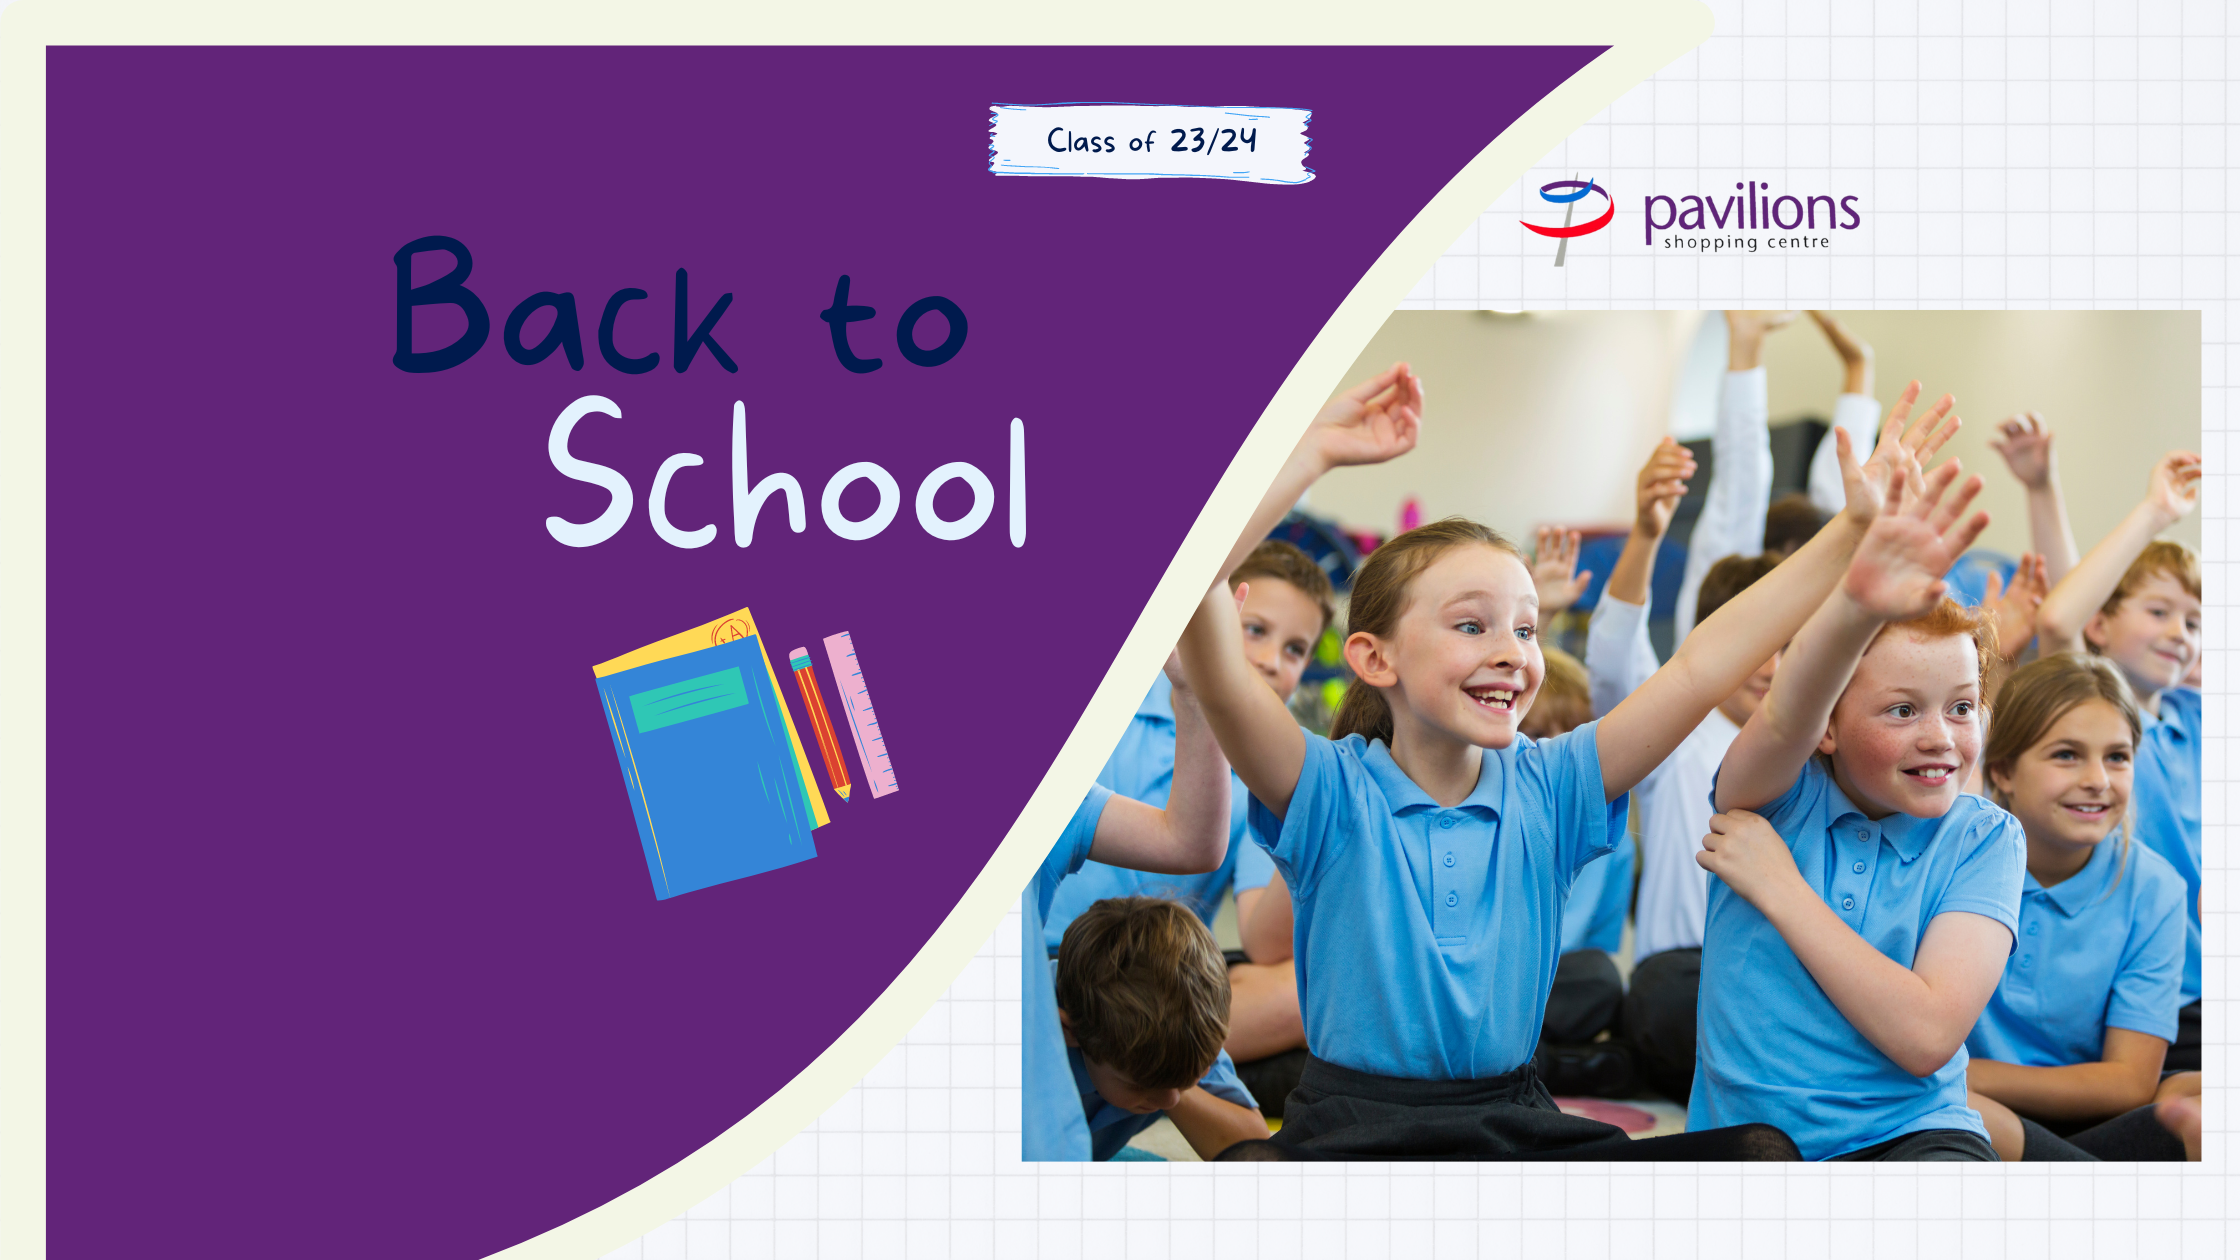 Back to School with Pavilions